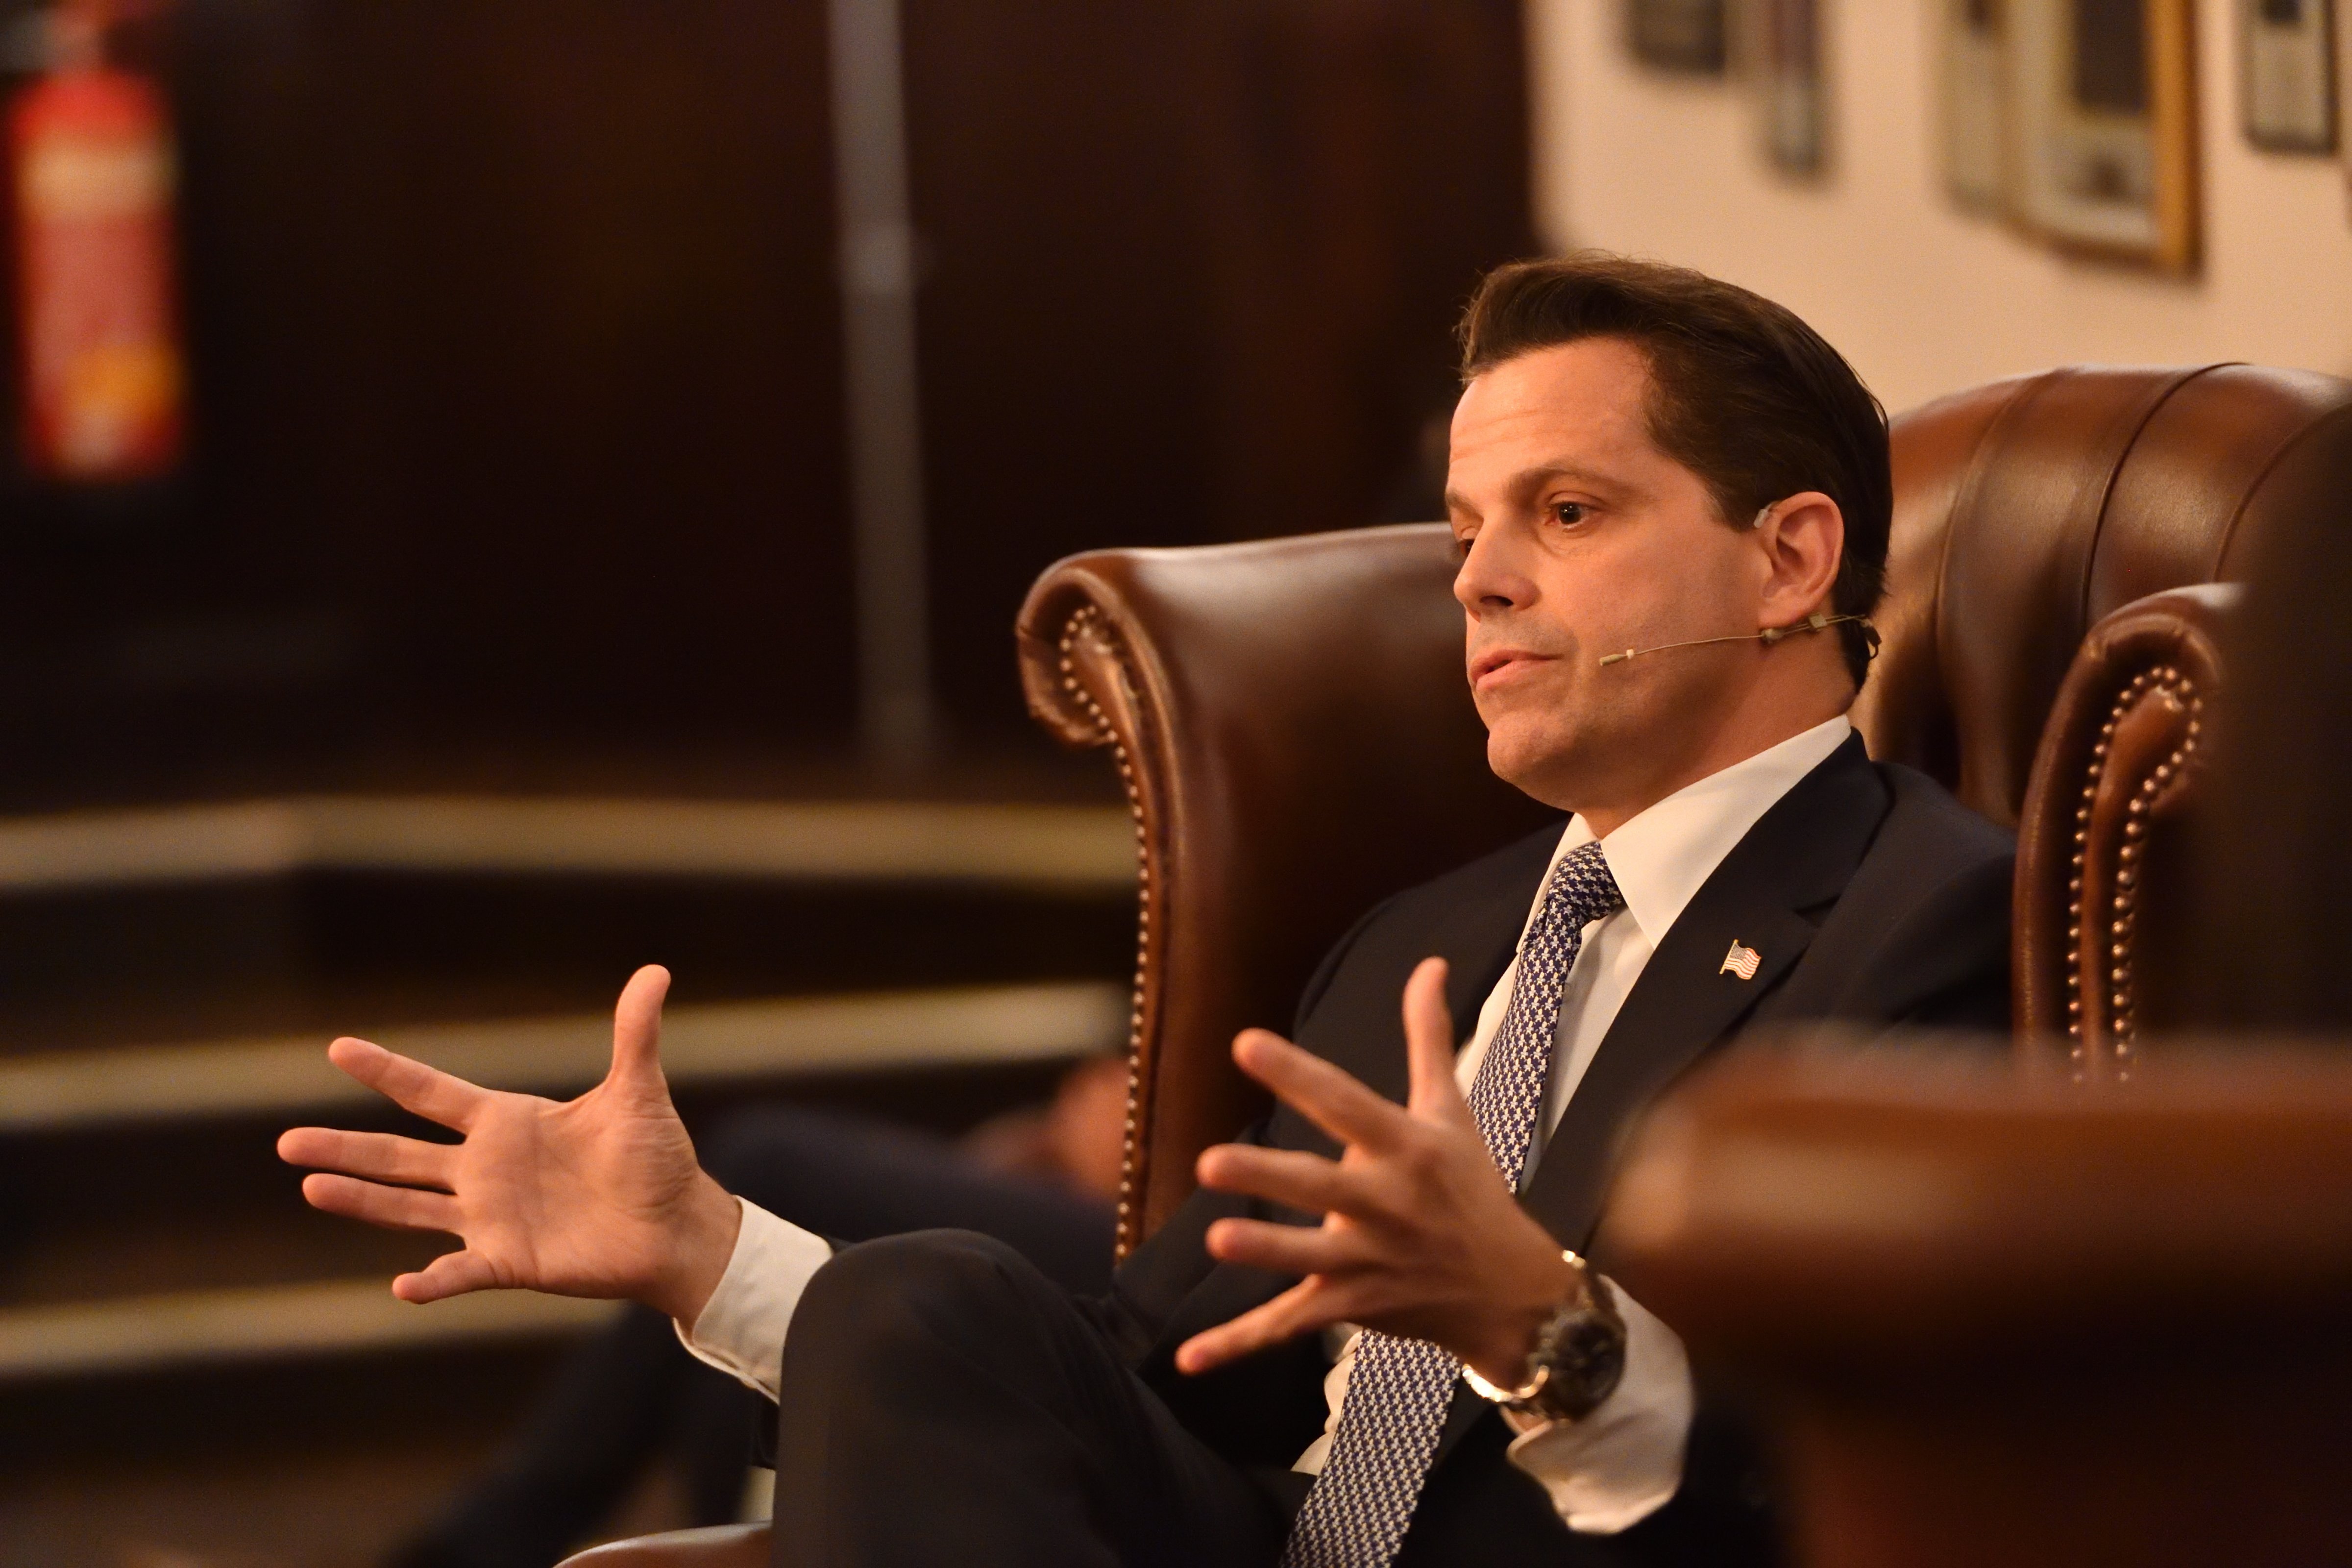 Former White House Communications Director Anthony Scaramucci addresses students at The Cambridge Union on Oct. 18, 2017 in Cambridge, Cambridgeshire. (Chris Williamson/Getty Images)